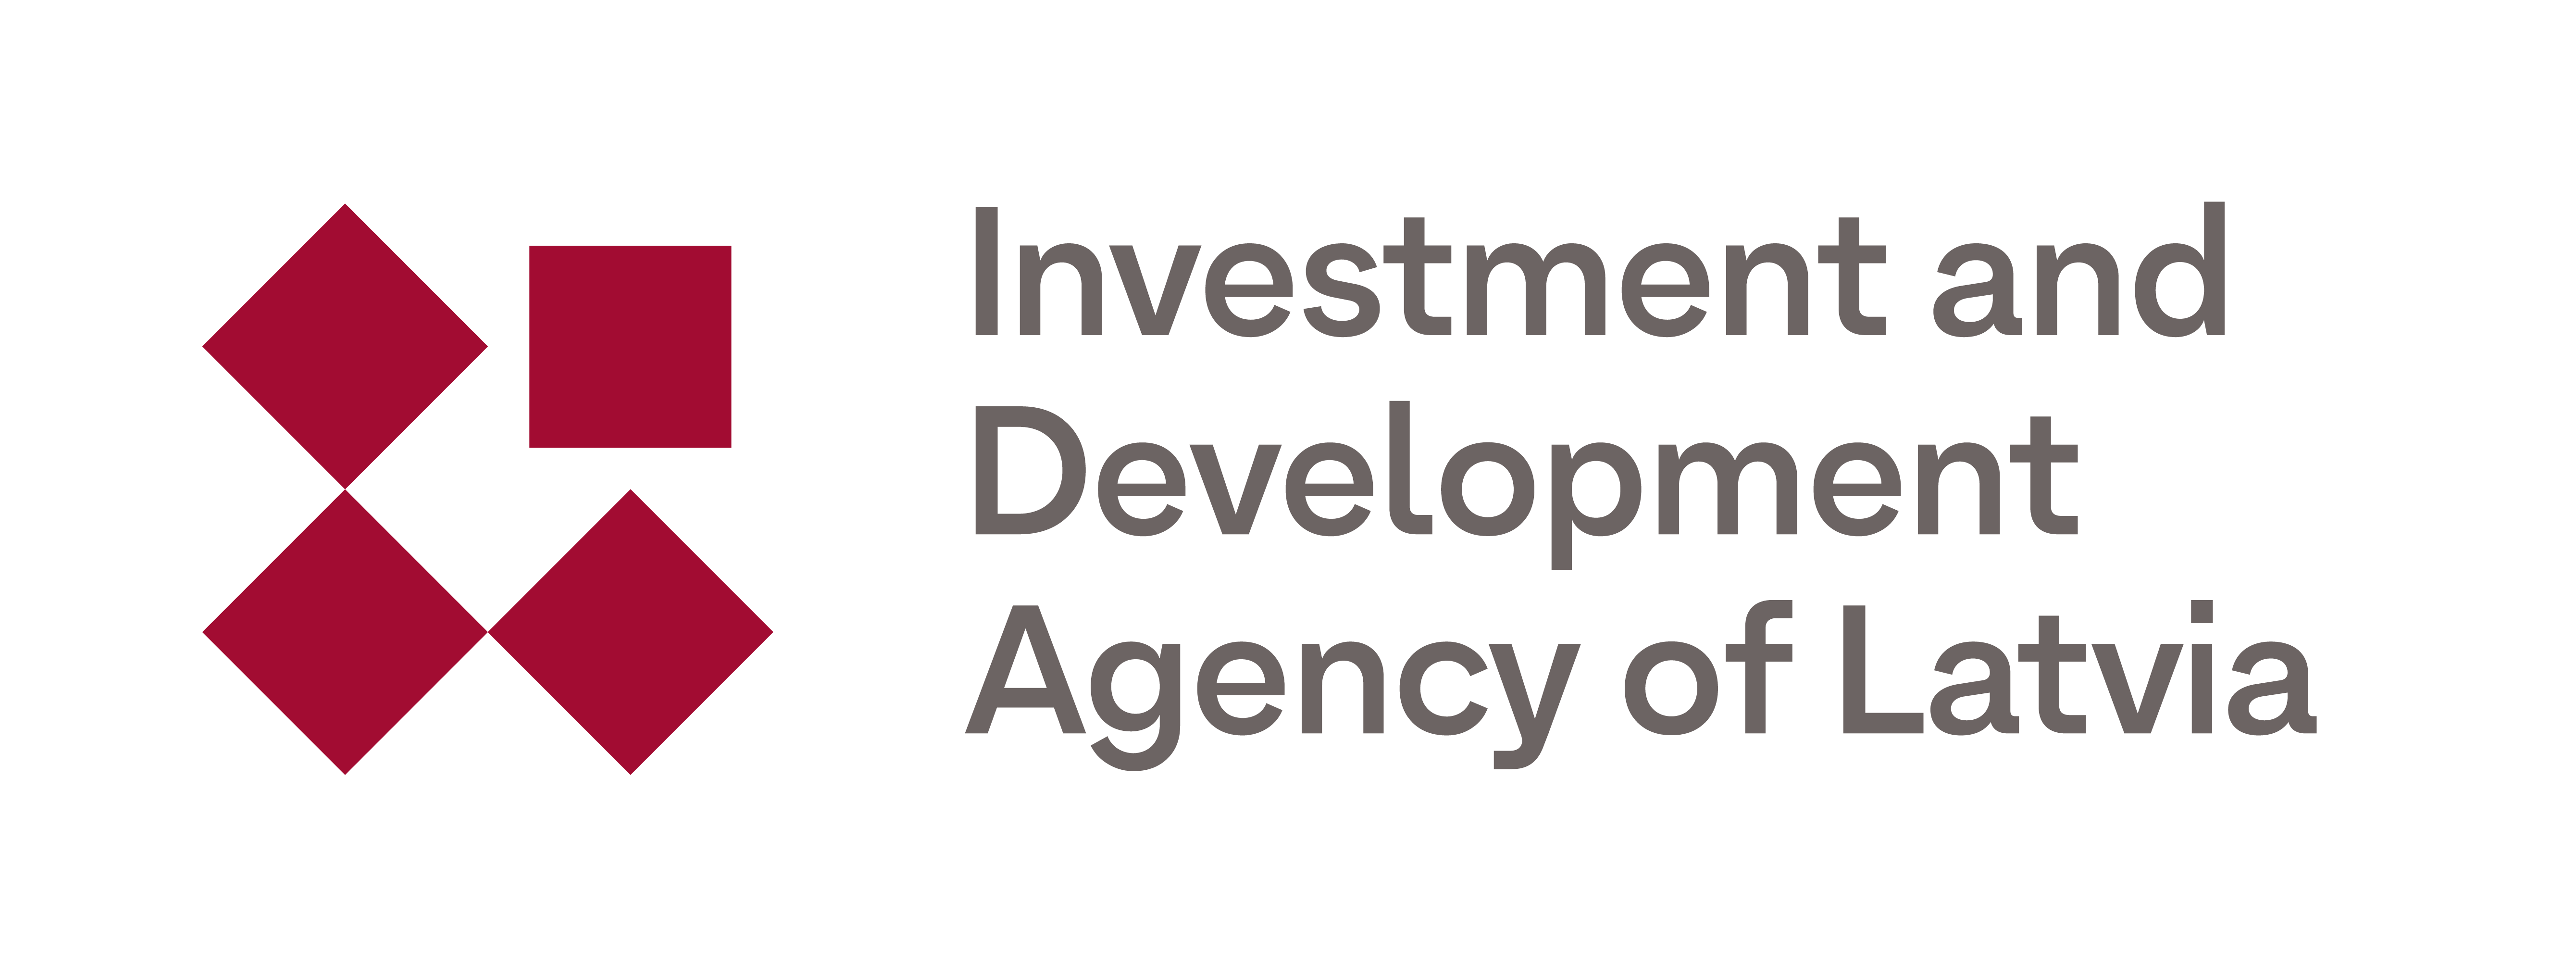 Large logo of Investment and Development Agency of Latvia